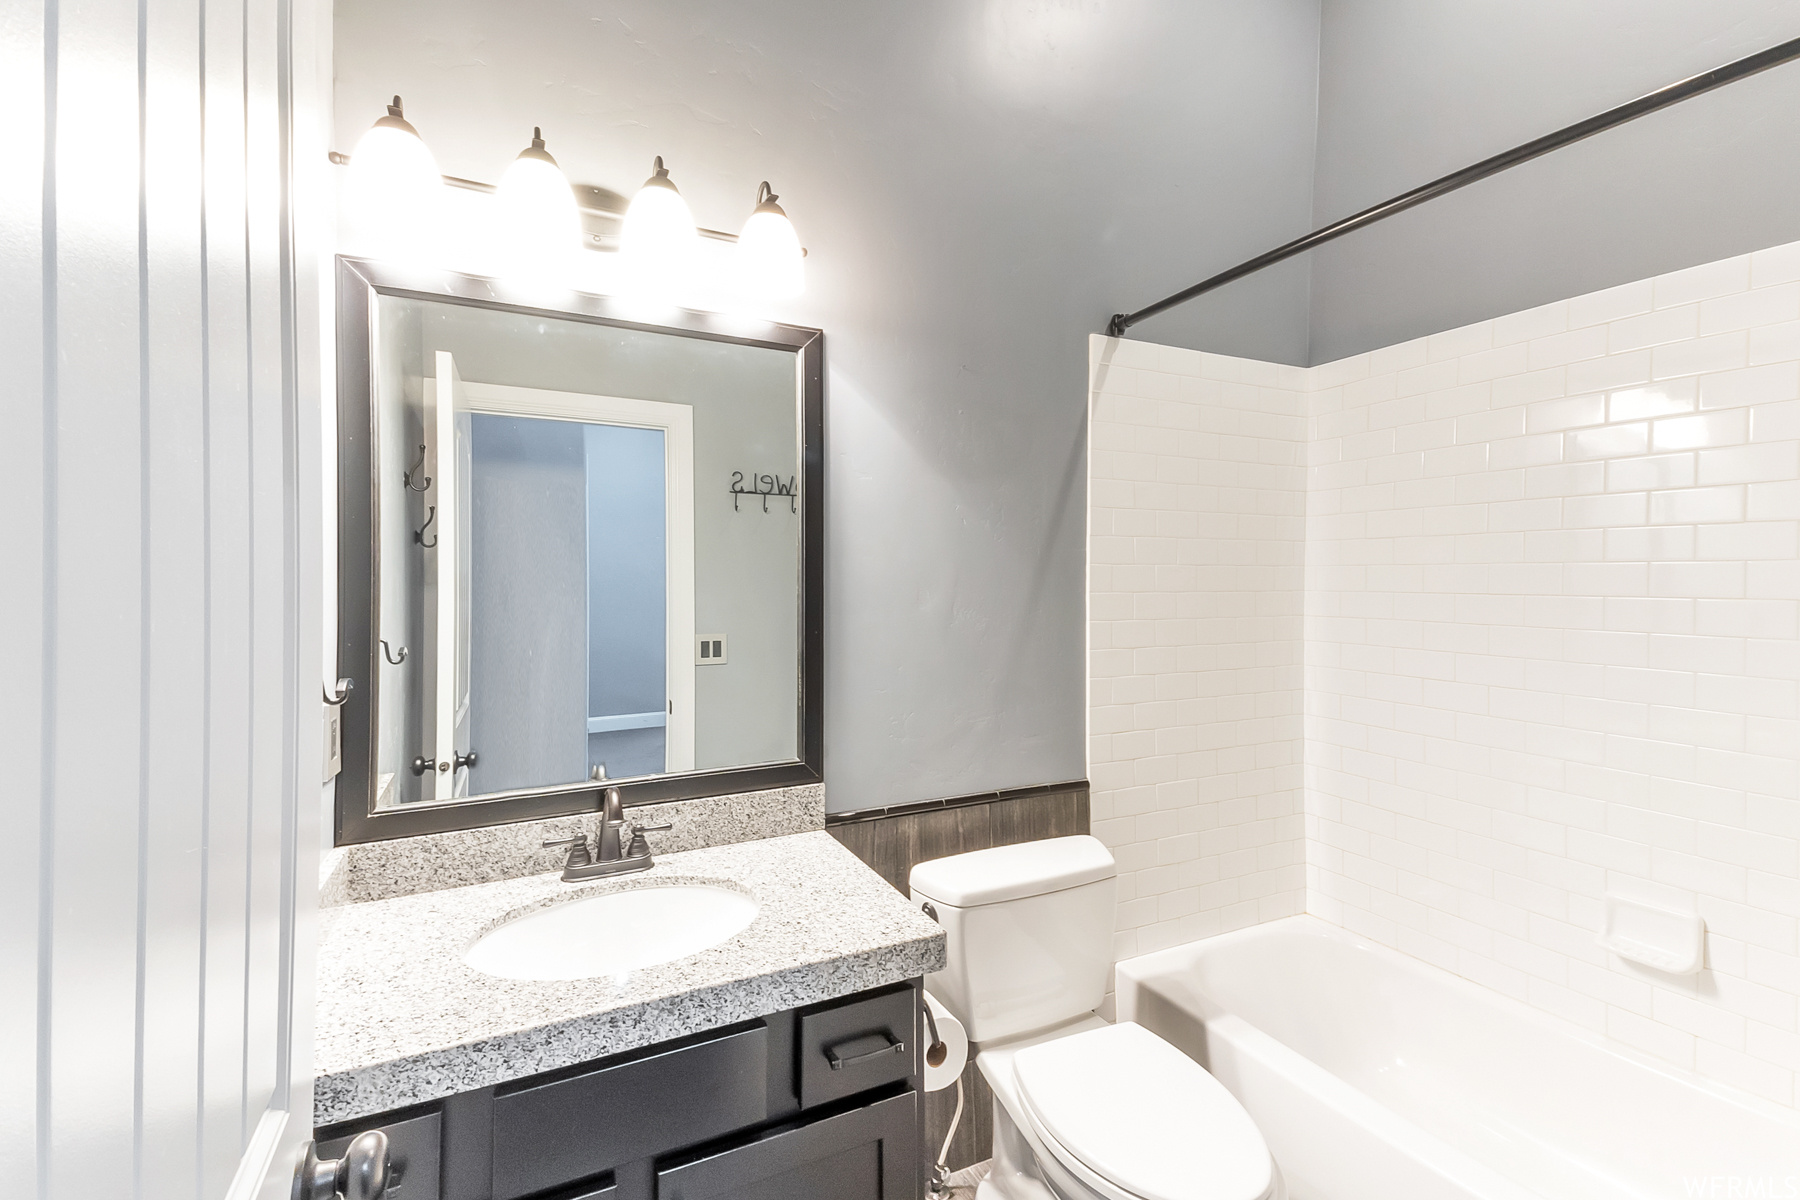 Full bathroom featuring granite vanity with extensive cabinet space, mirror, and tiled shower / bath